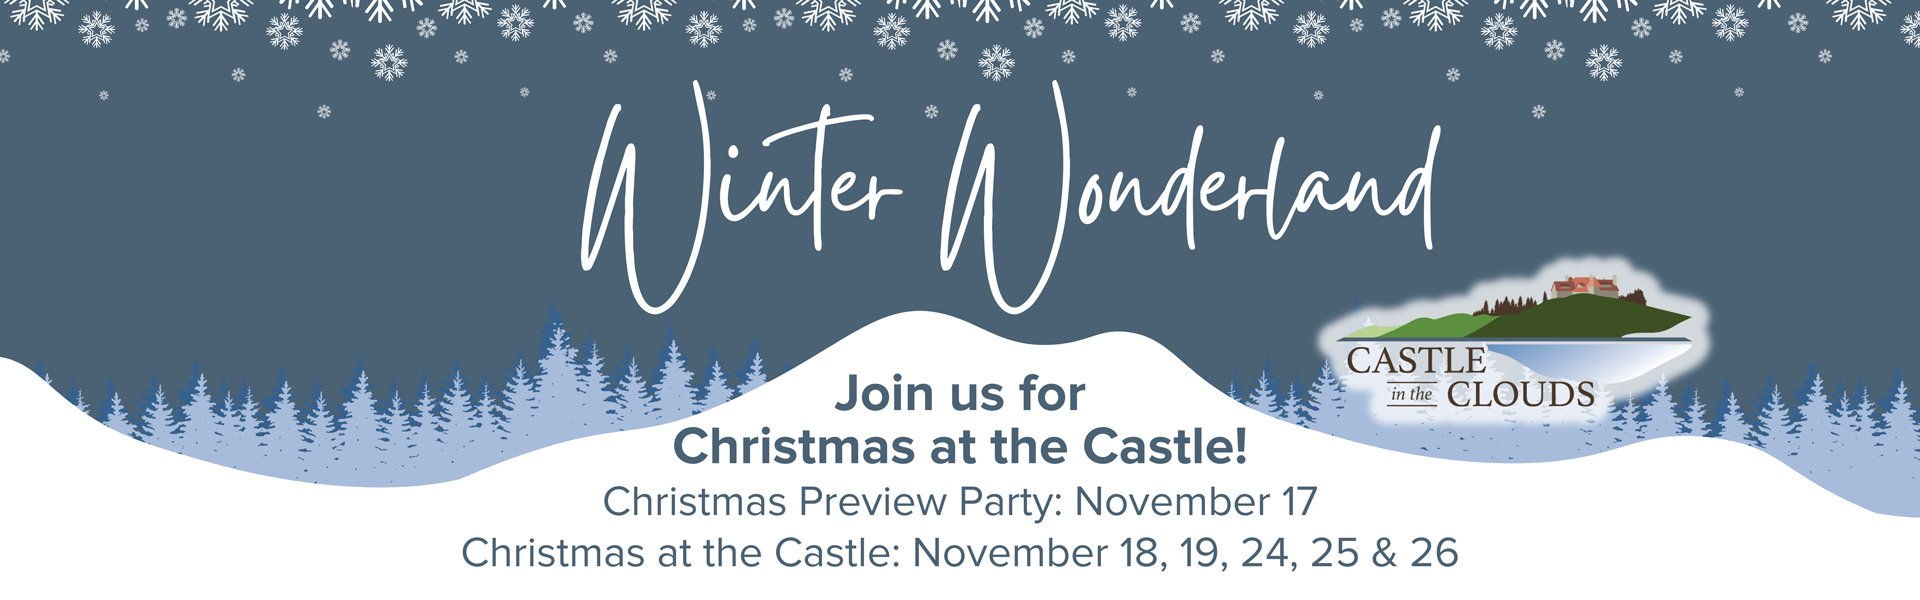 Winter Wonderland, Join us for Christmas at the Castle! Christmas Preview Party November 17. Christmas at the Castle November 18, 19, 24, 25, & 26